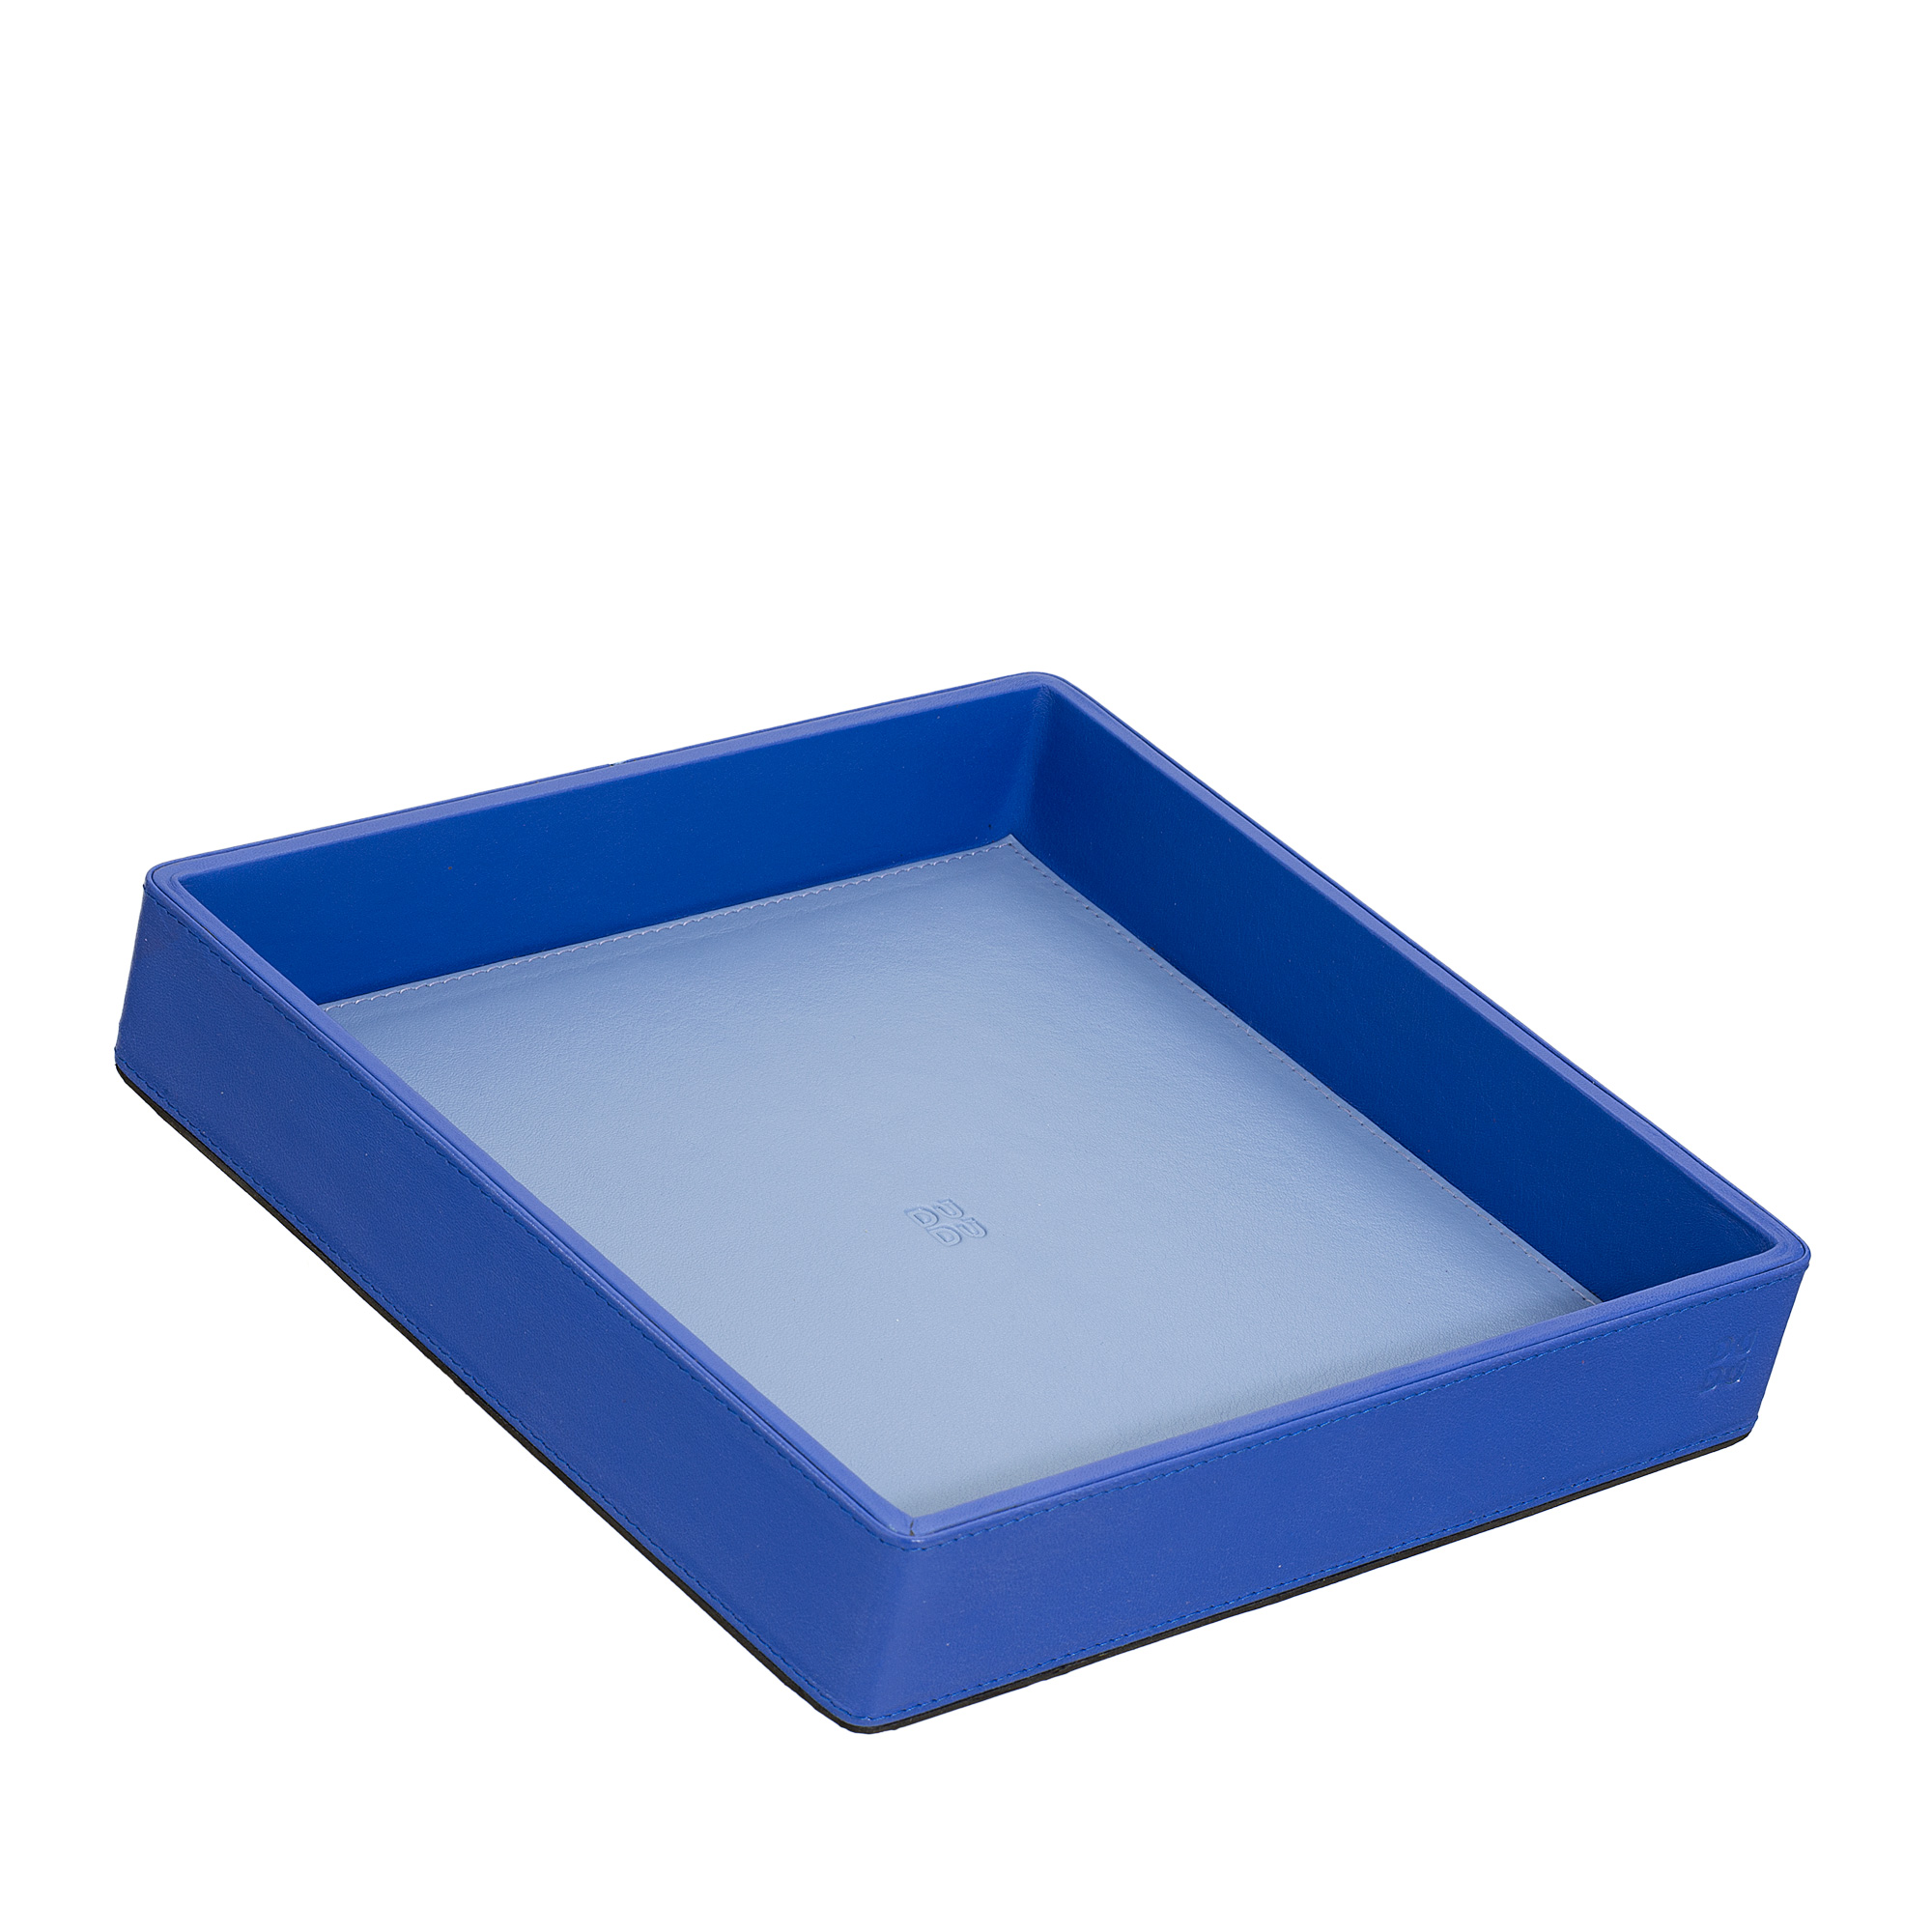 Colorful - Valet tray - Fiordaliso